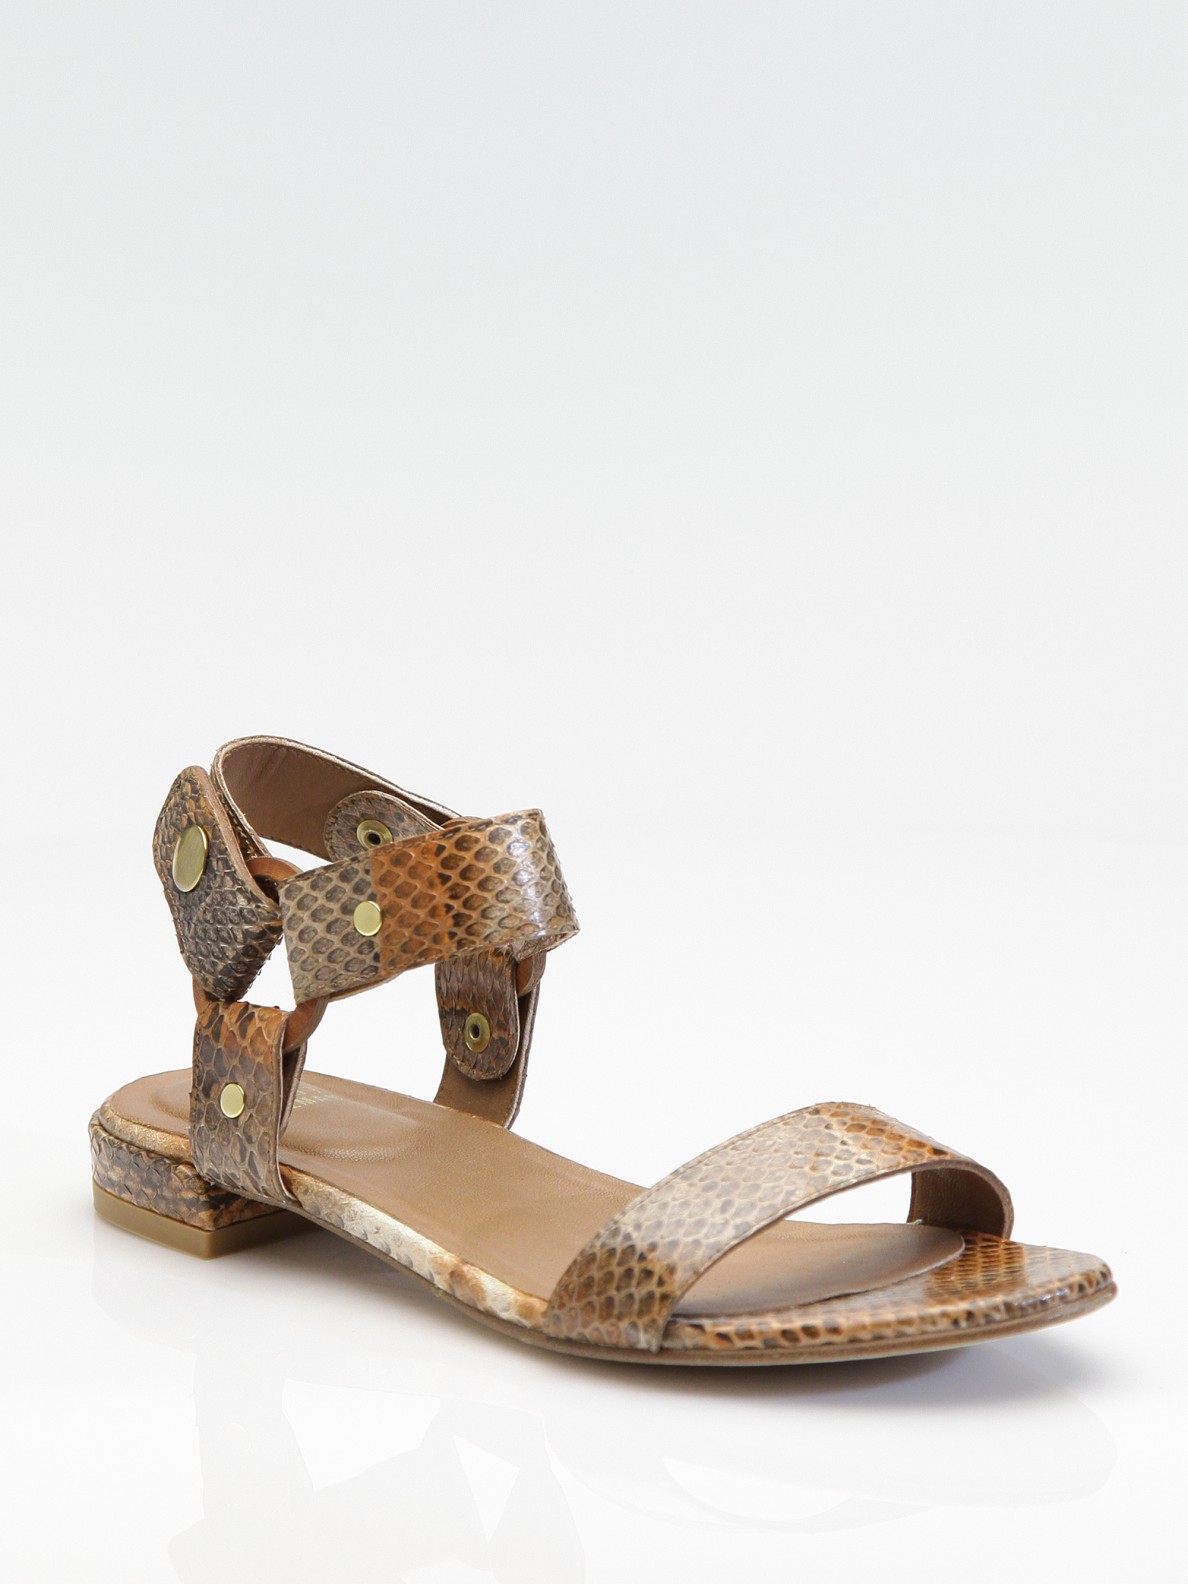 Lyst - Stuart Weitzman Snake-embossed Leather Flat Sandals in Brown